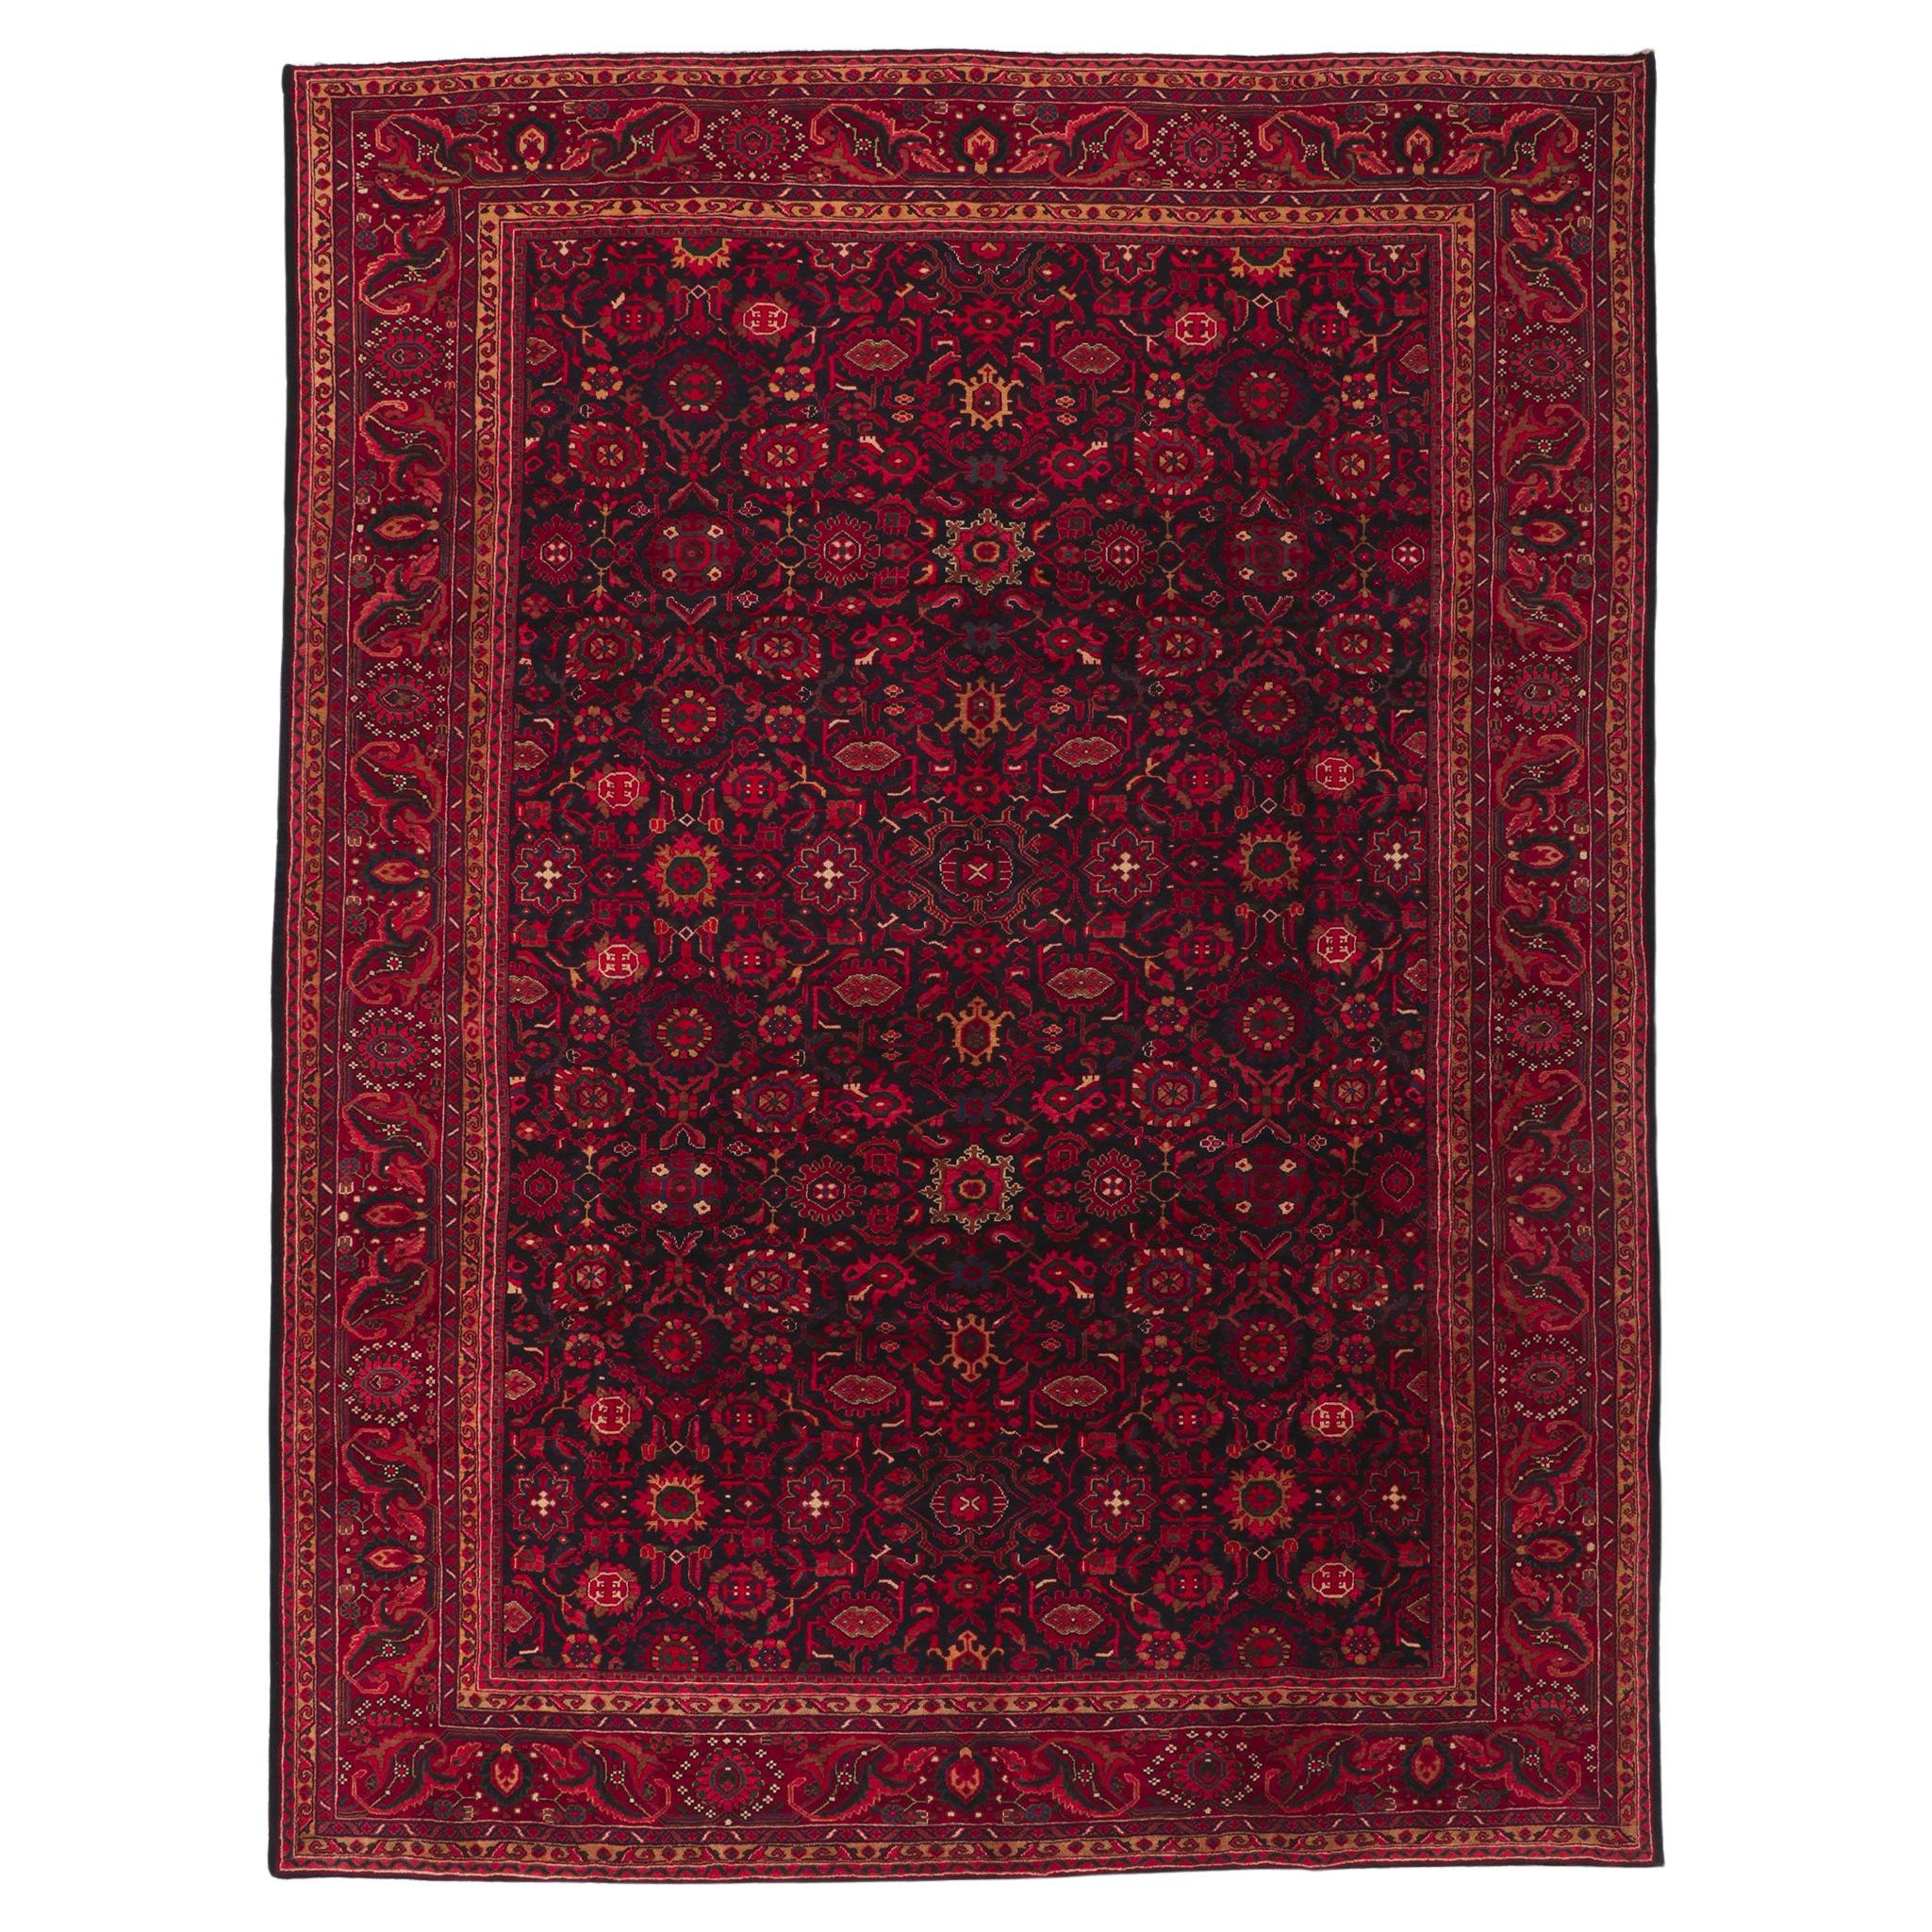 Vintage Persian Malayer Rug, Timeless Beguilement Meets Regal Refinement